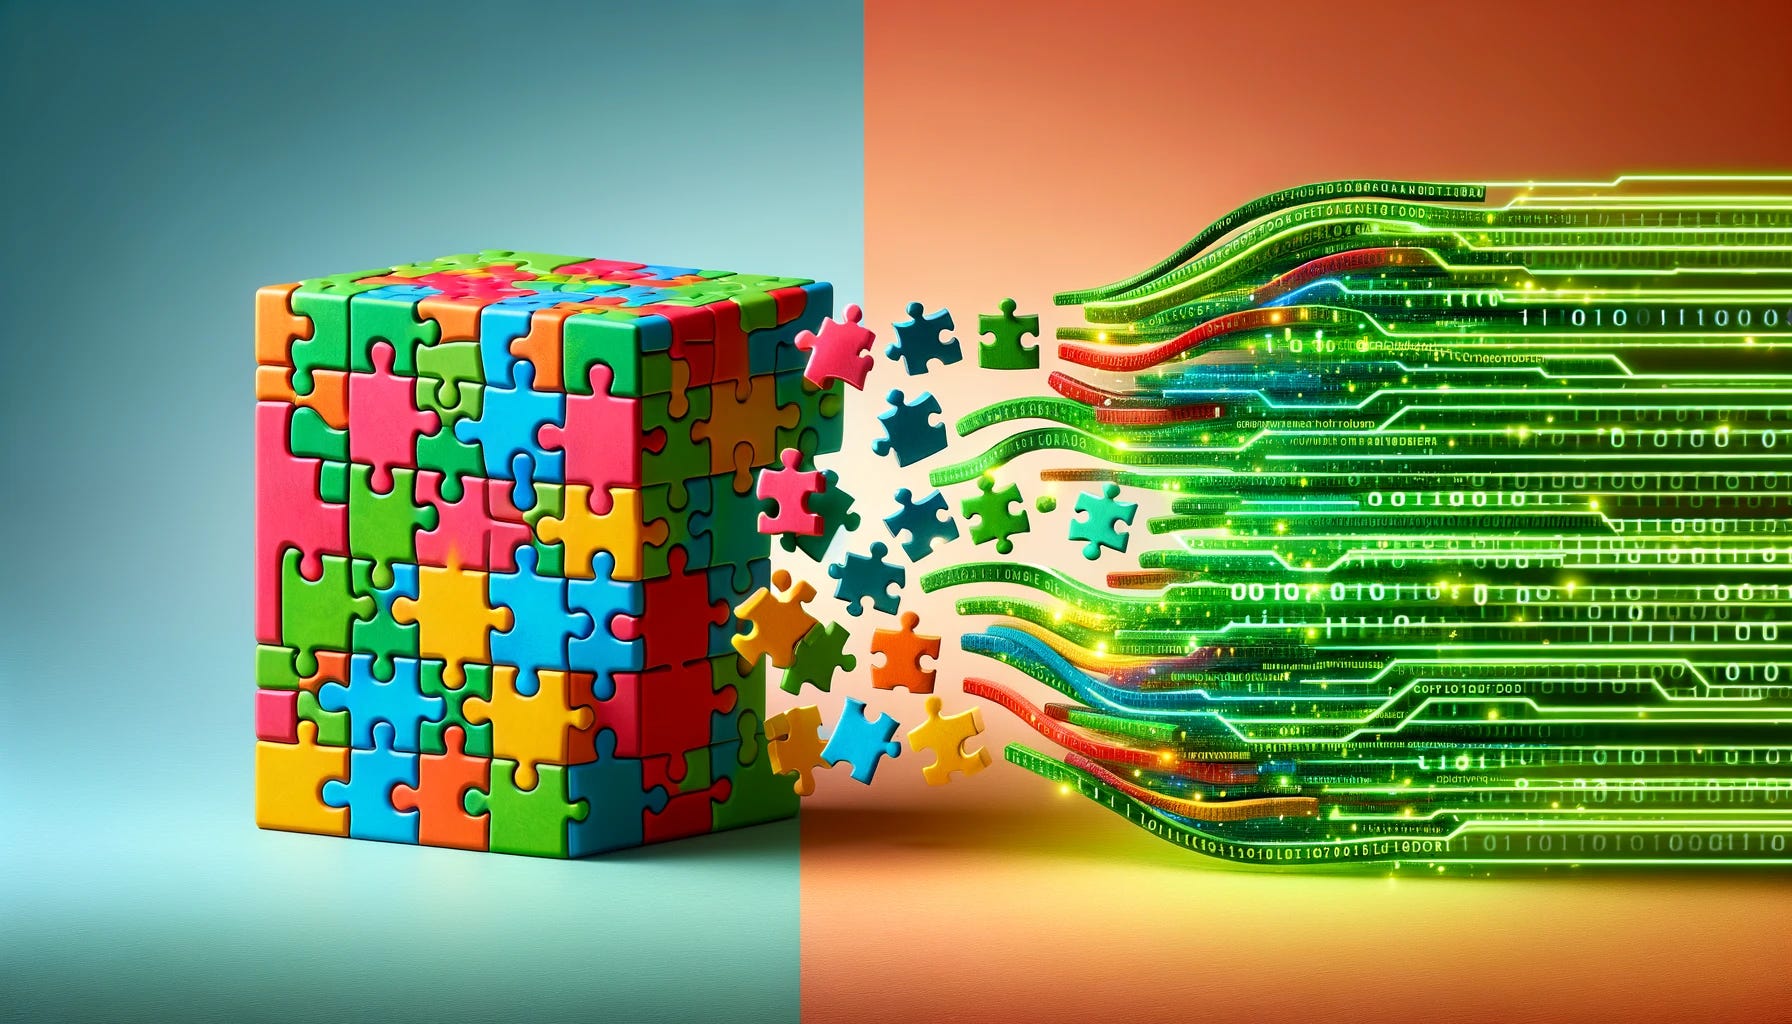 A playful and creative image showcasing a transformation from a colorful jigsaw puzzle on the left side to digital code on the right side. The puzzle pieces should be brightly colored, with some pieces partially fitting together, symbolizing the process of problem-solving. As the image transitions to the right, these puzzle pieces should gradually morph into streams of glowing green binary code, representing digital data and programming. The background should be a gradient, smoothly blending from a light, cheerful color on the puzzle side to a darker, more sophisticated hue on the code side, emphasizing the transition from physical to digital.